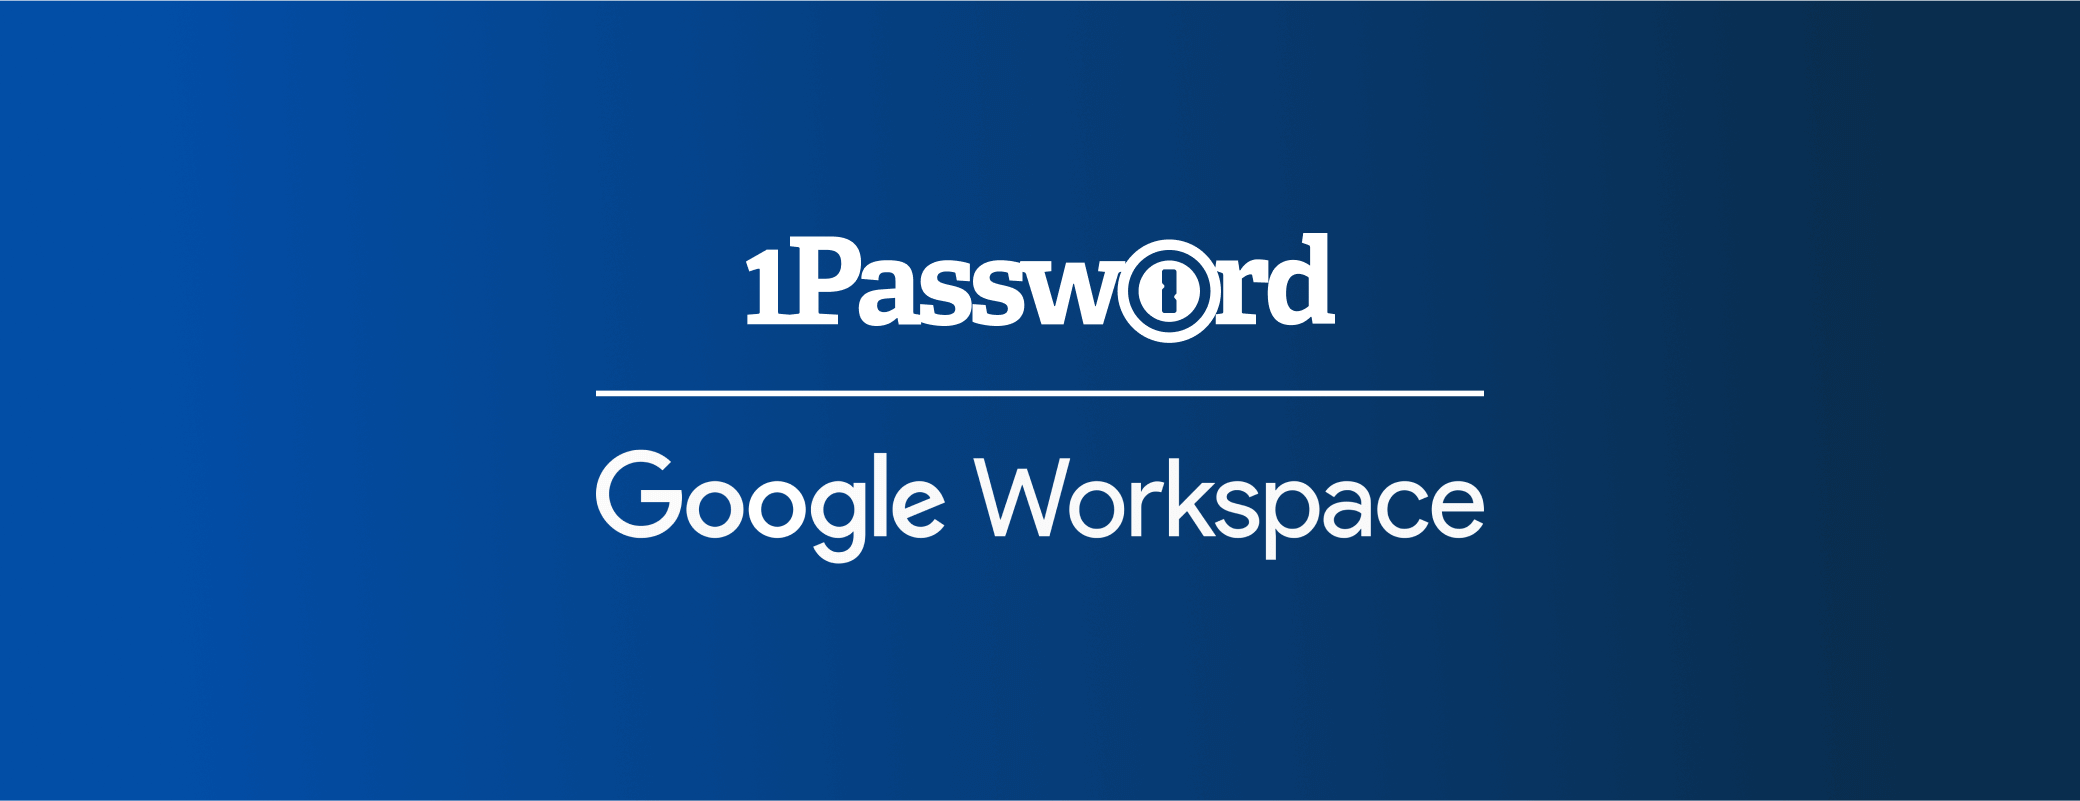 Automate provisioning in 1Password with Google Workspace